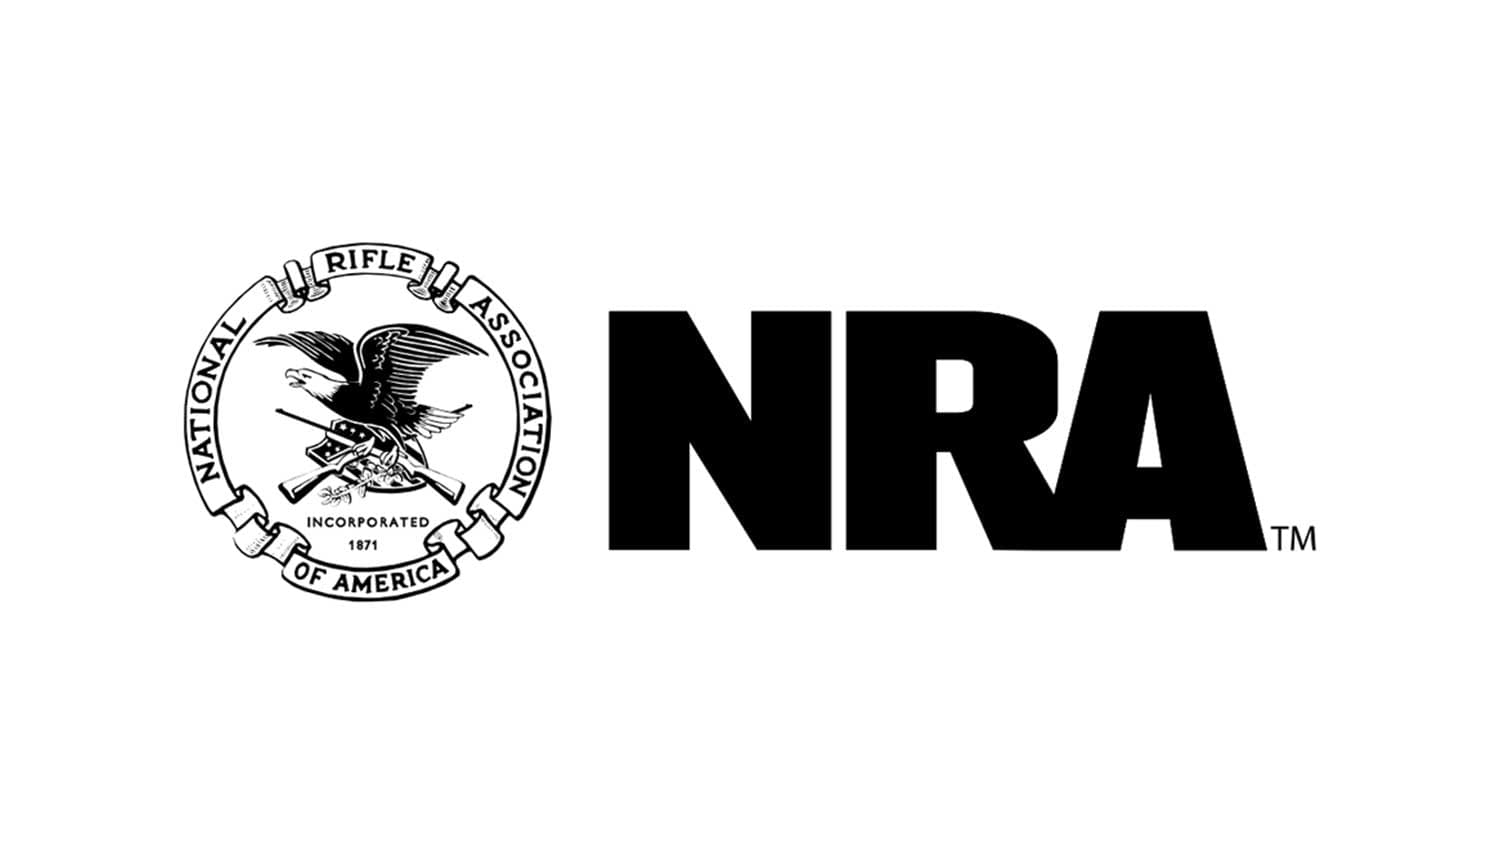 Event Sponsor at the NRA Annual Meetings & Exhibits